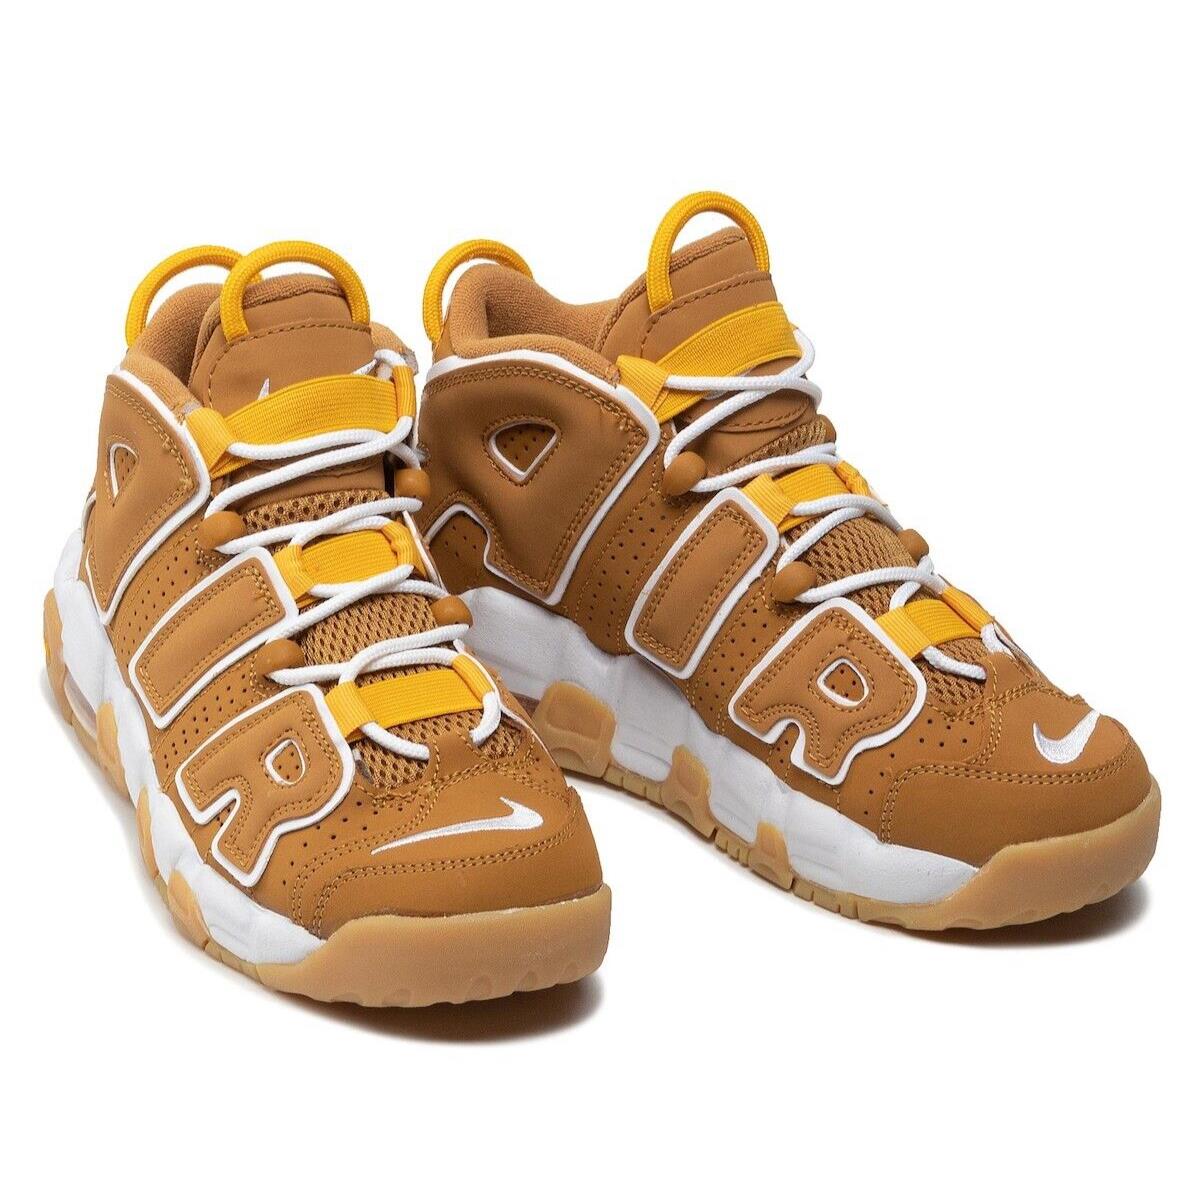 Women 6.5US Nike Air More Uptempo Wheat Basketball Retro Sneakers Youth Size 5US - Brown